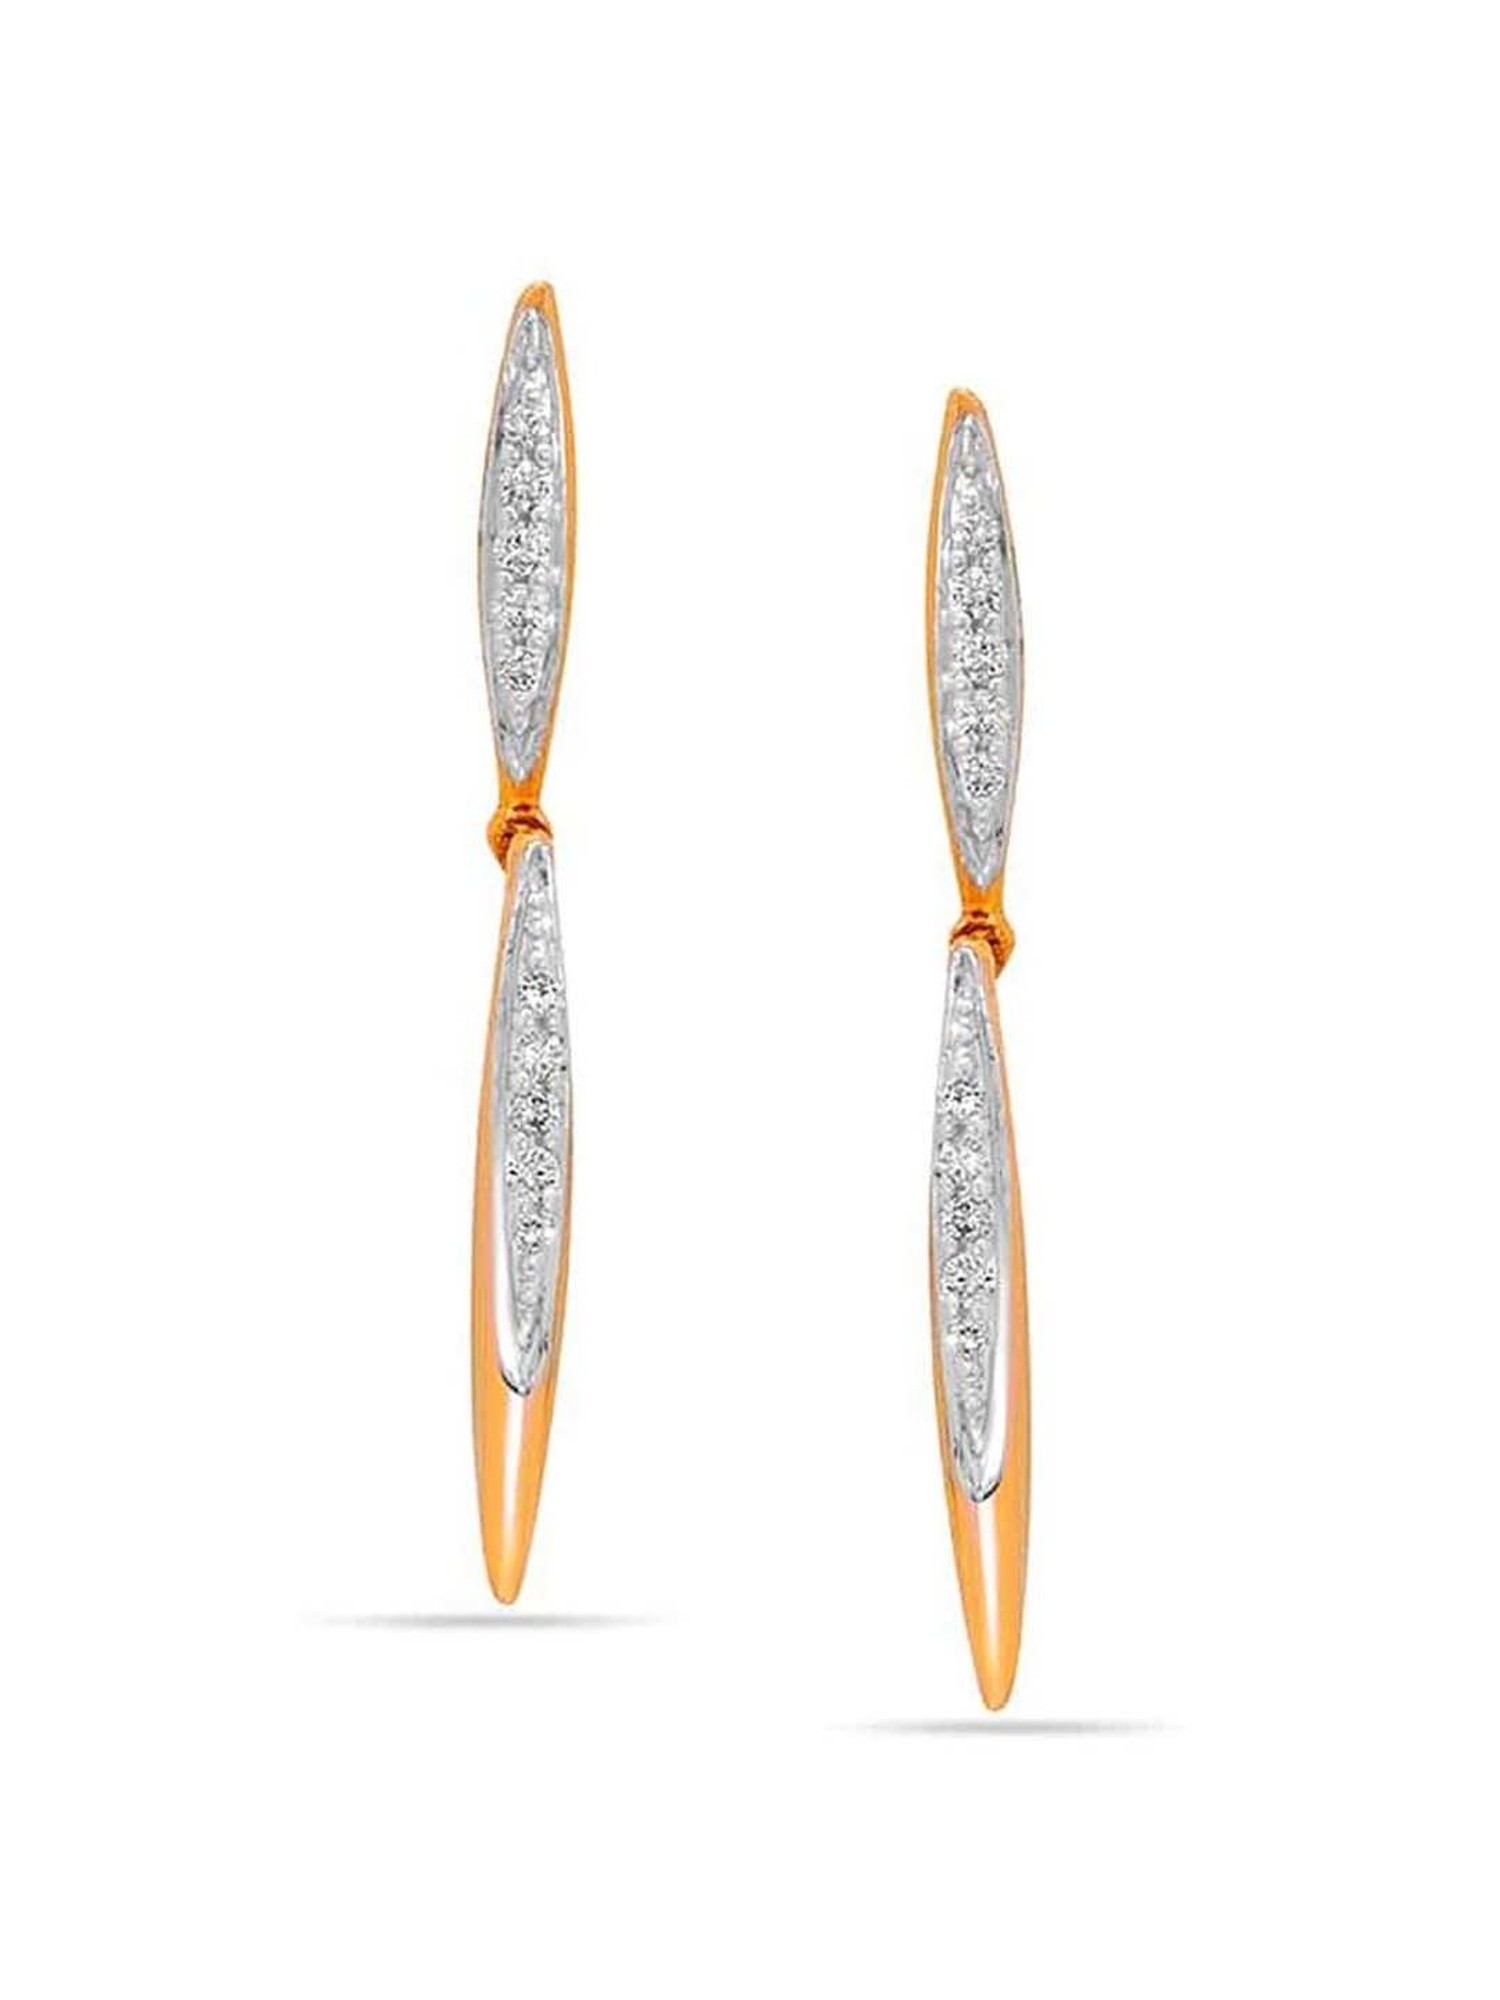 Mia by Tanishq 14kt Yellow Gold Shell Stud Earrings : Amazon.in: Fashion